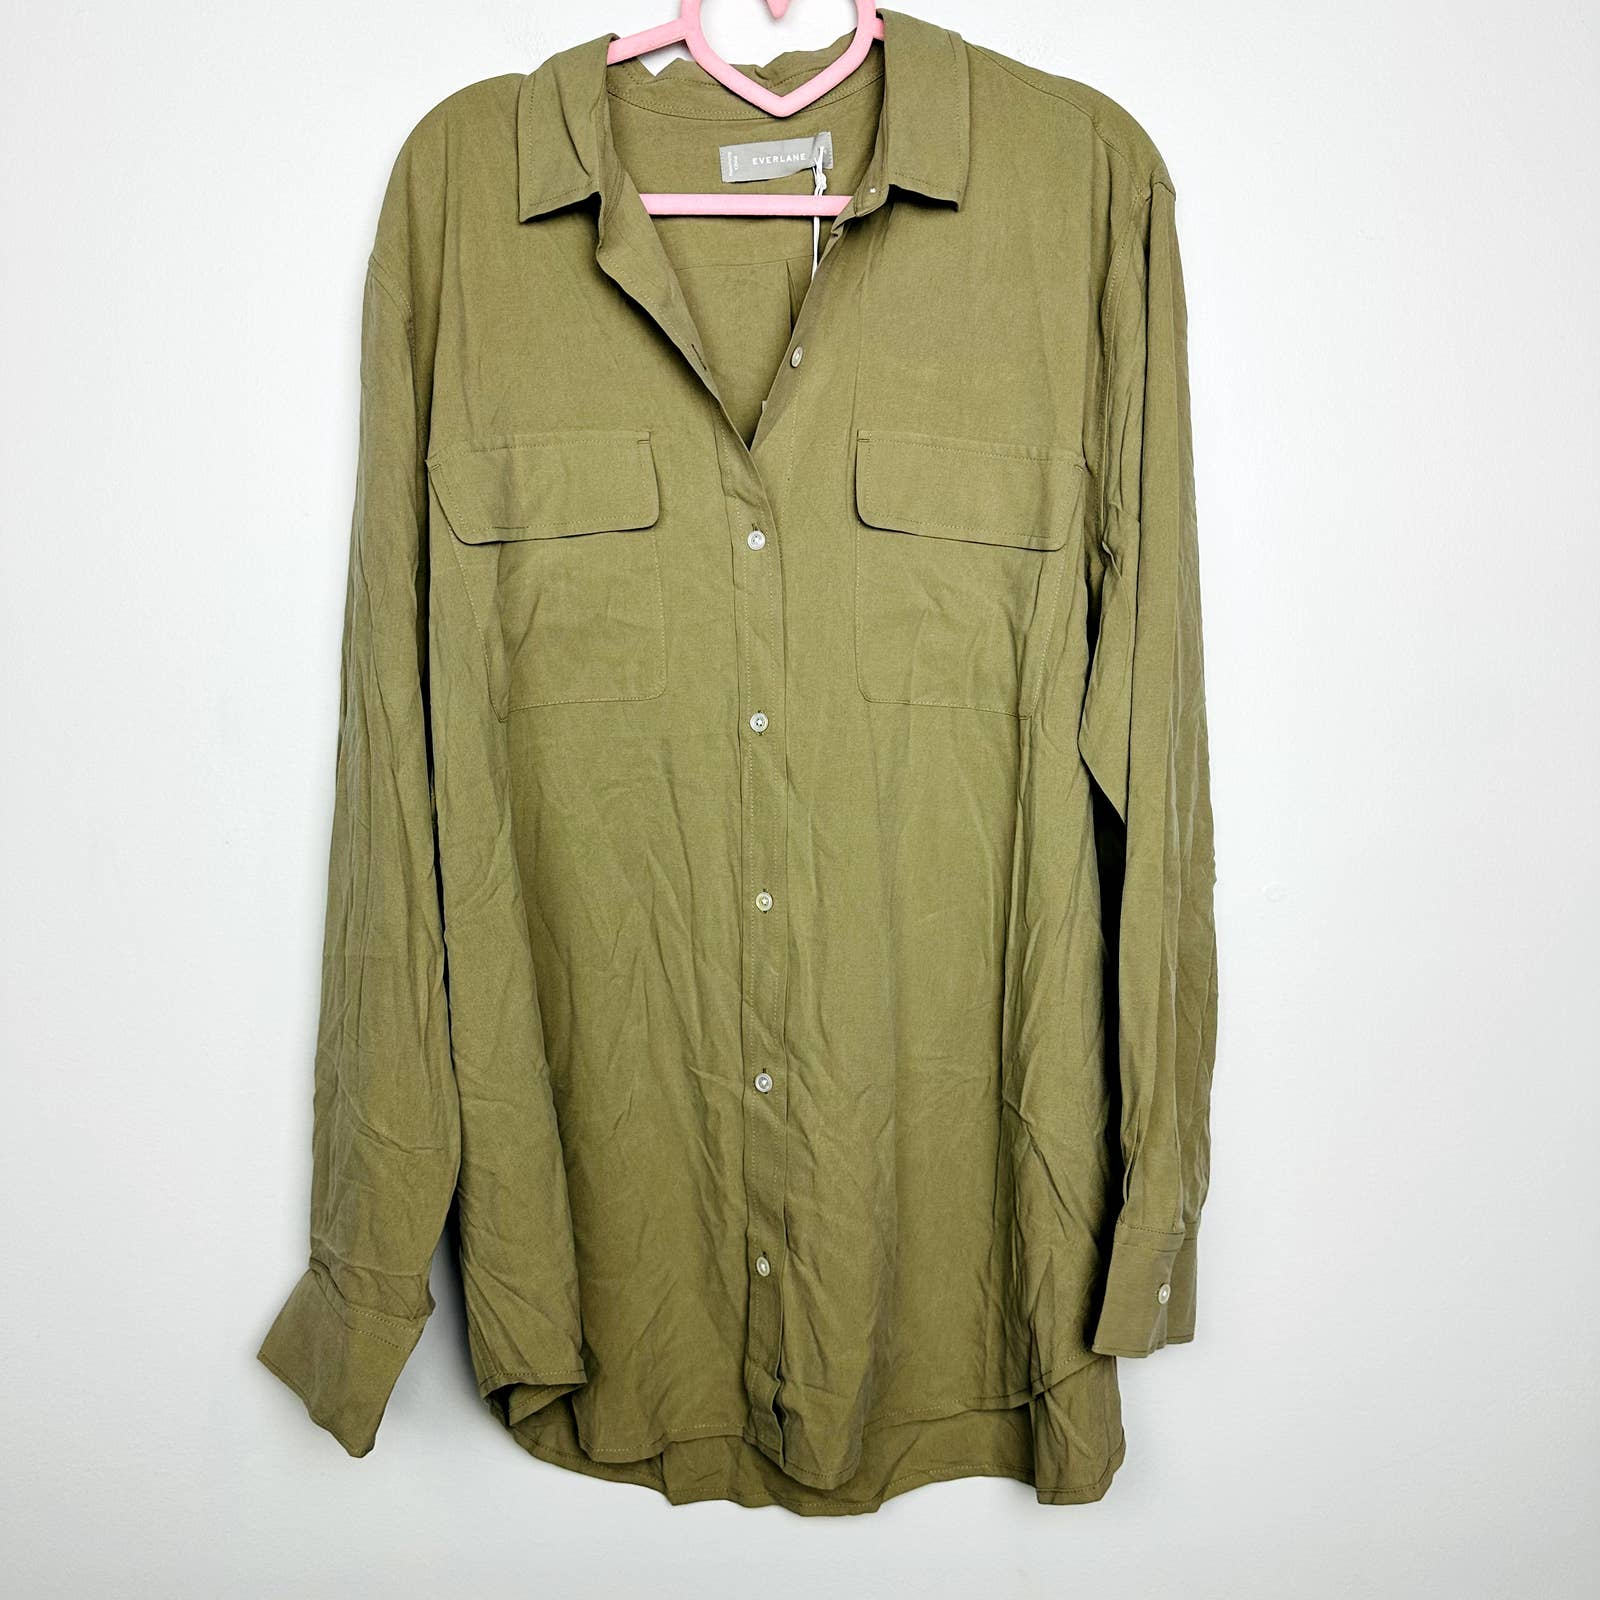 Everlane NWT The Washable Silk Relaxed Button Down Tunic Shirt Green Plus Sz 16